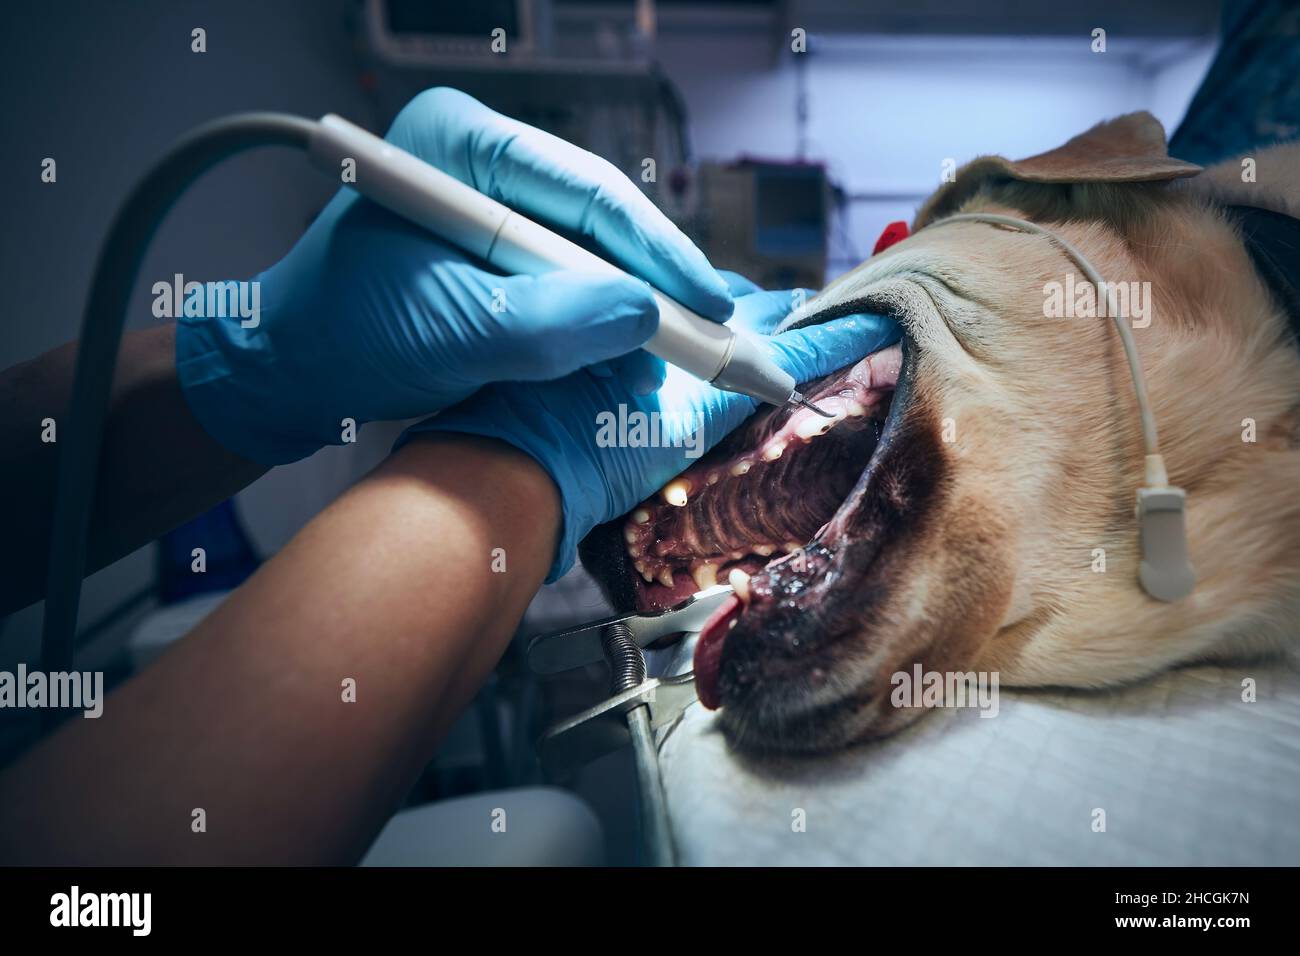 Veterinarian during examining and cleaning dog teeth. Old labrador retriever in animal hospital. Stock Photo